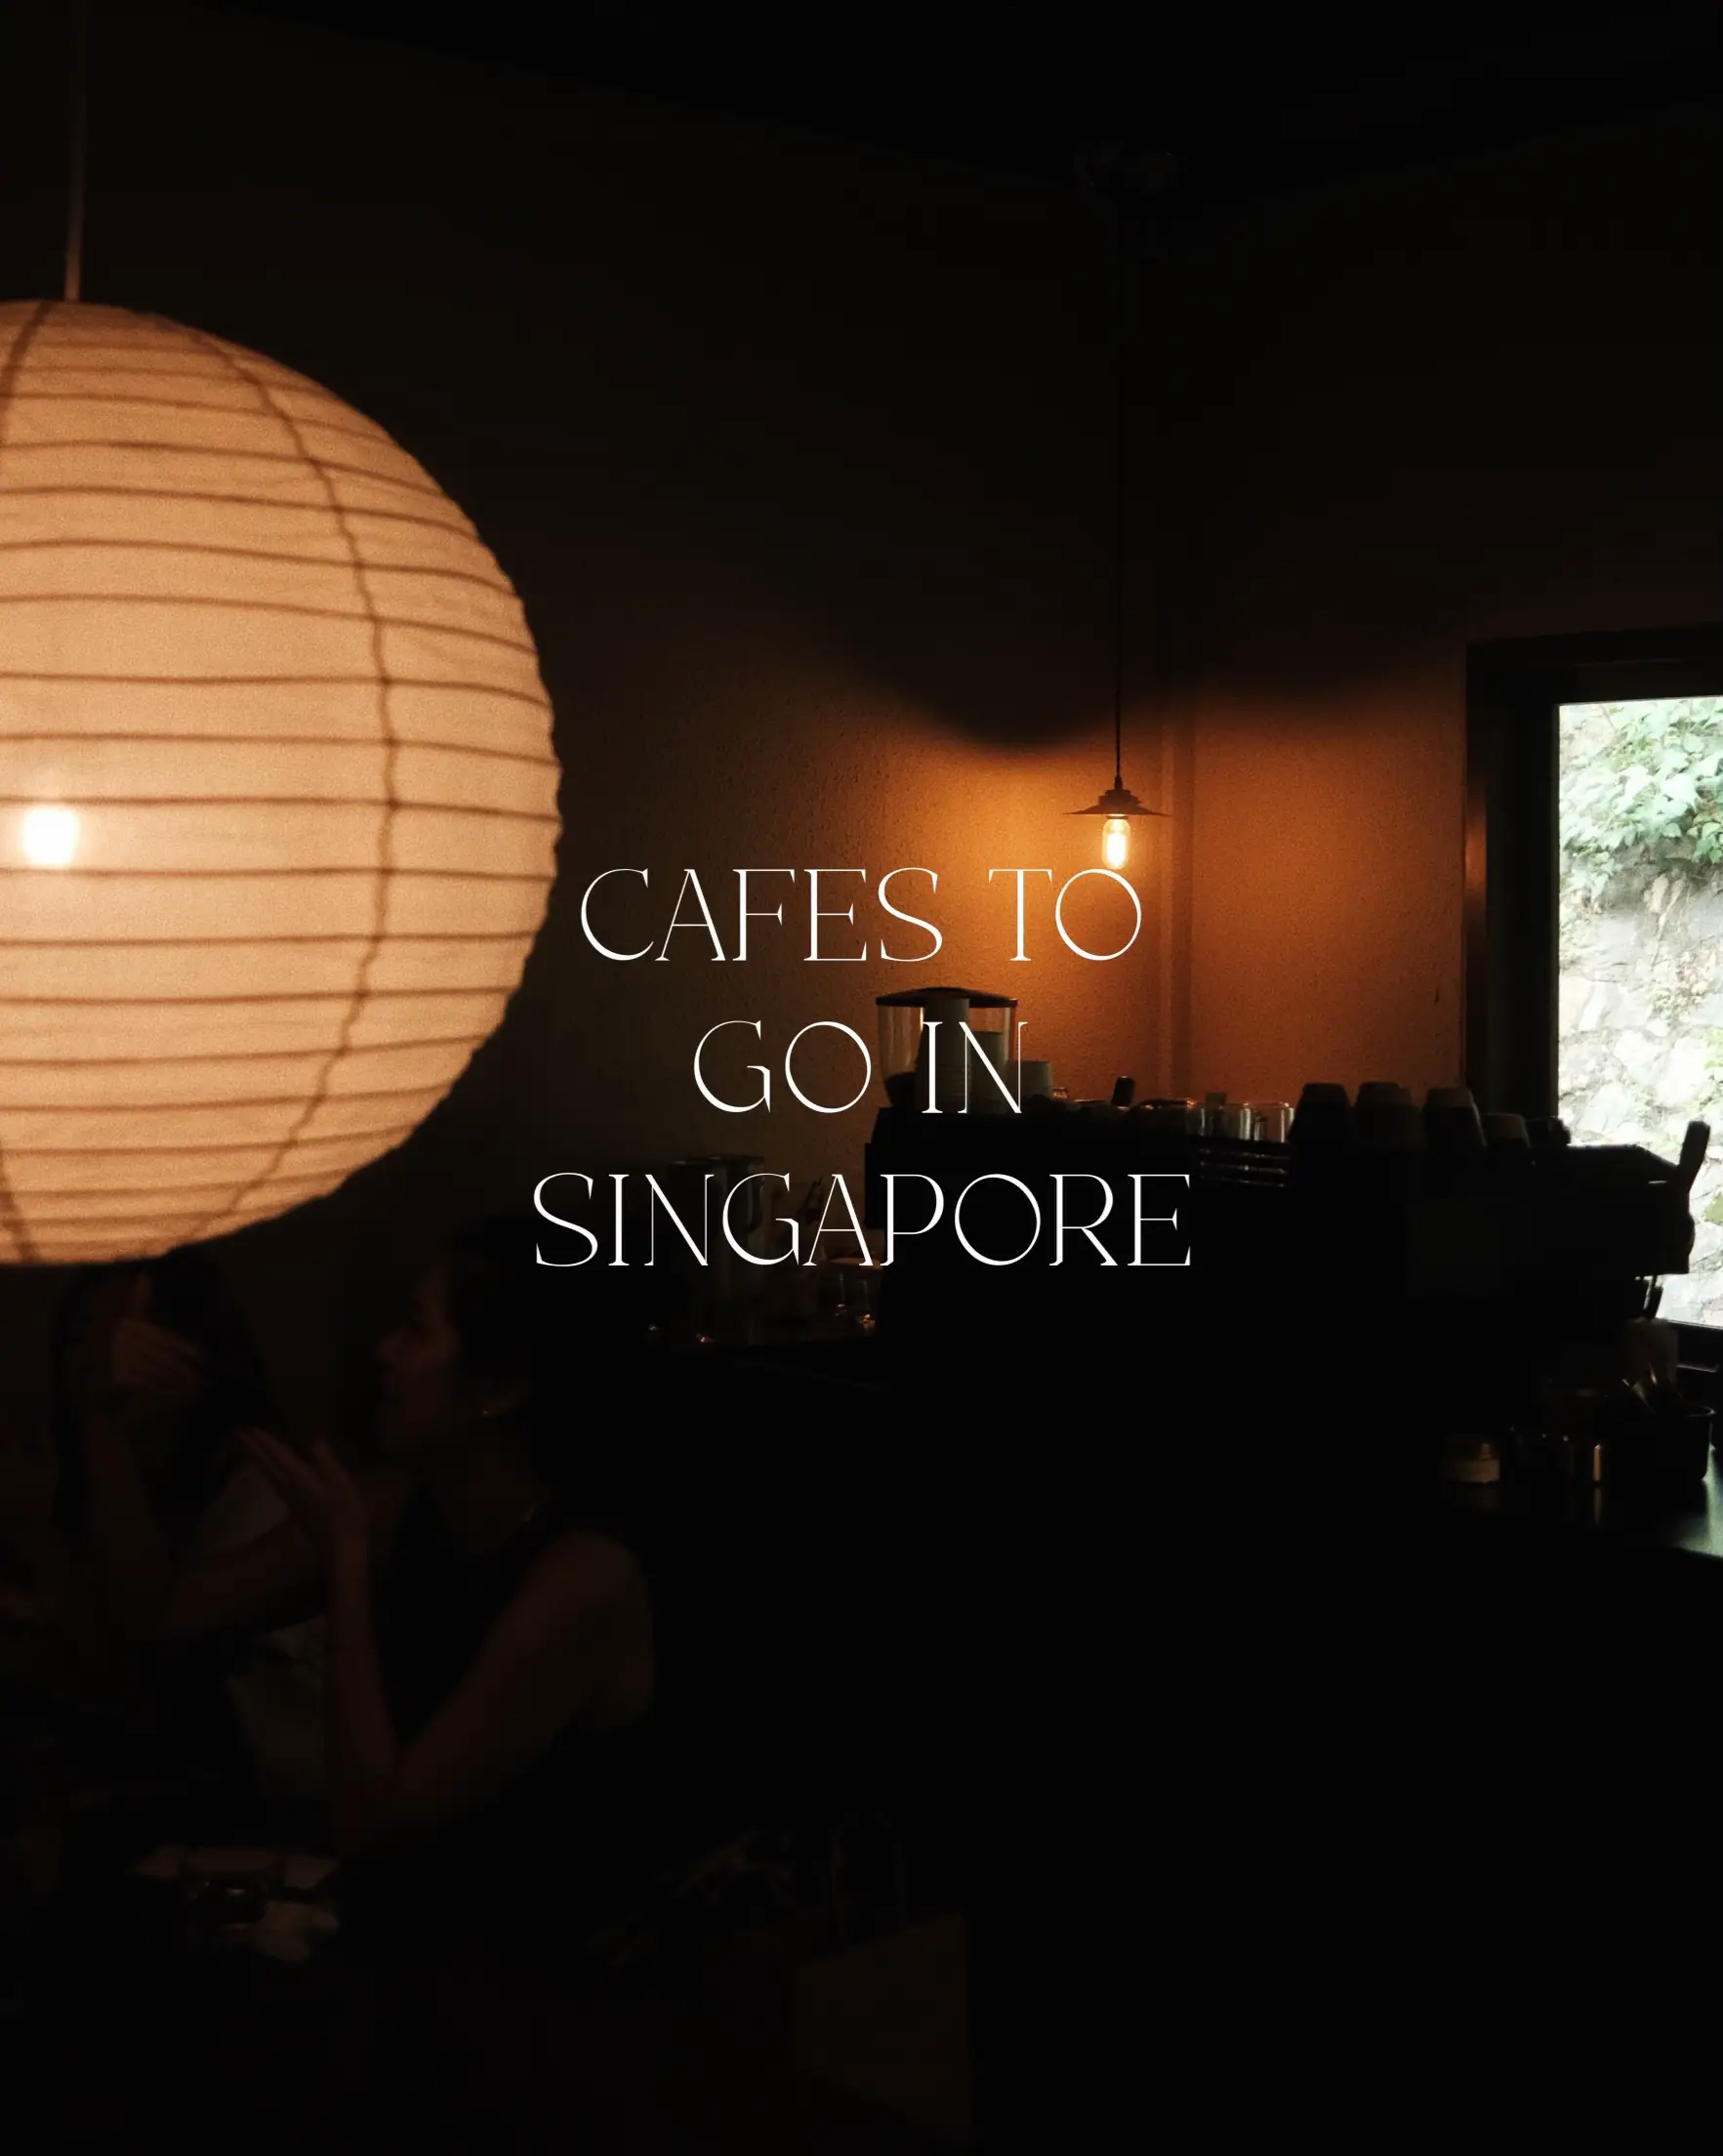 Cafes/Bars to Go In Singapore ♥️🎀's images